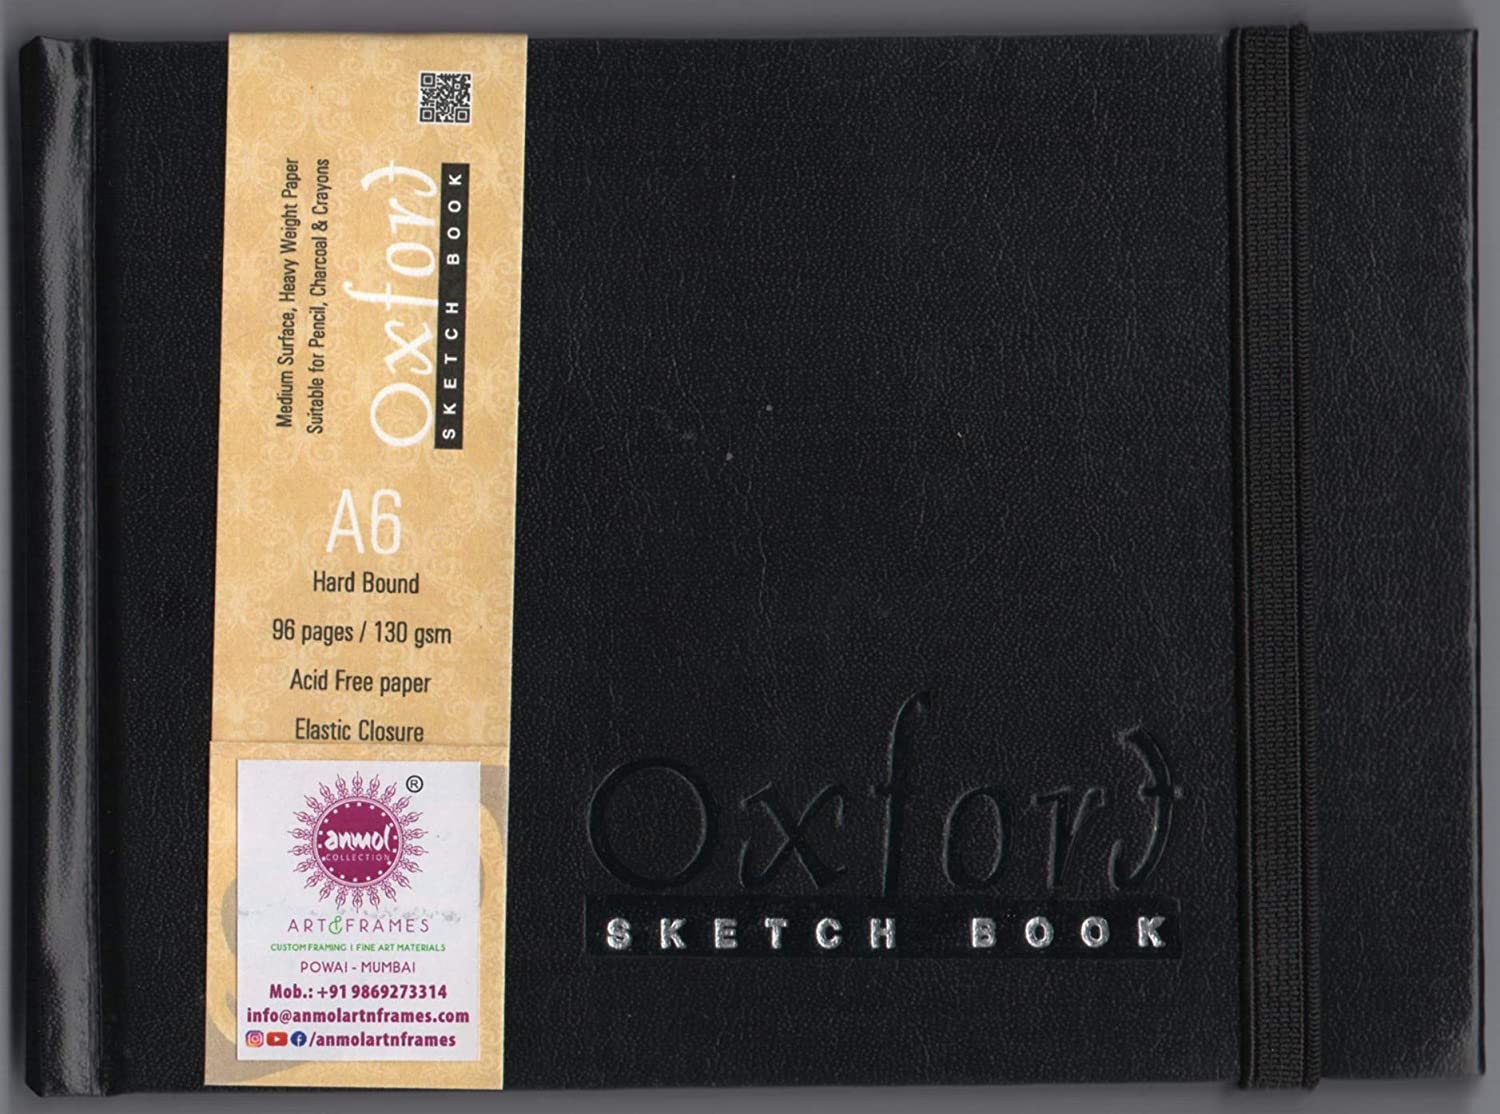 Anupam Oxford Sketch Book - 96 Pages, 130GSM (A6 Size) 